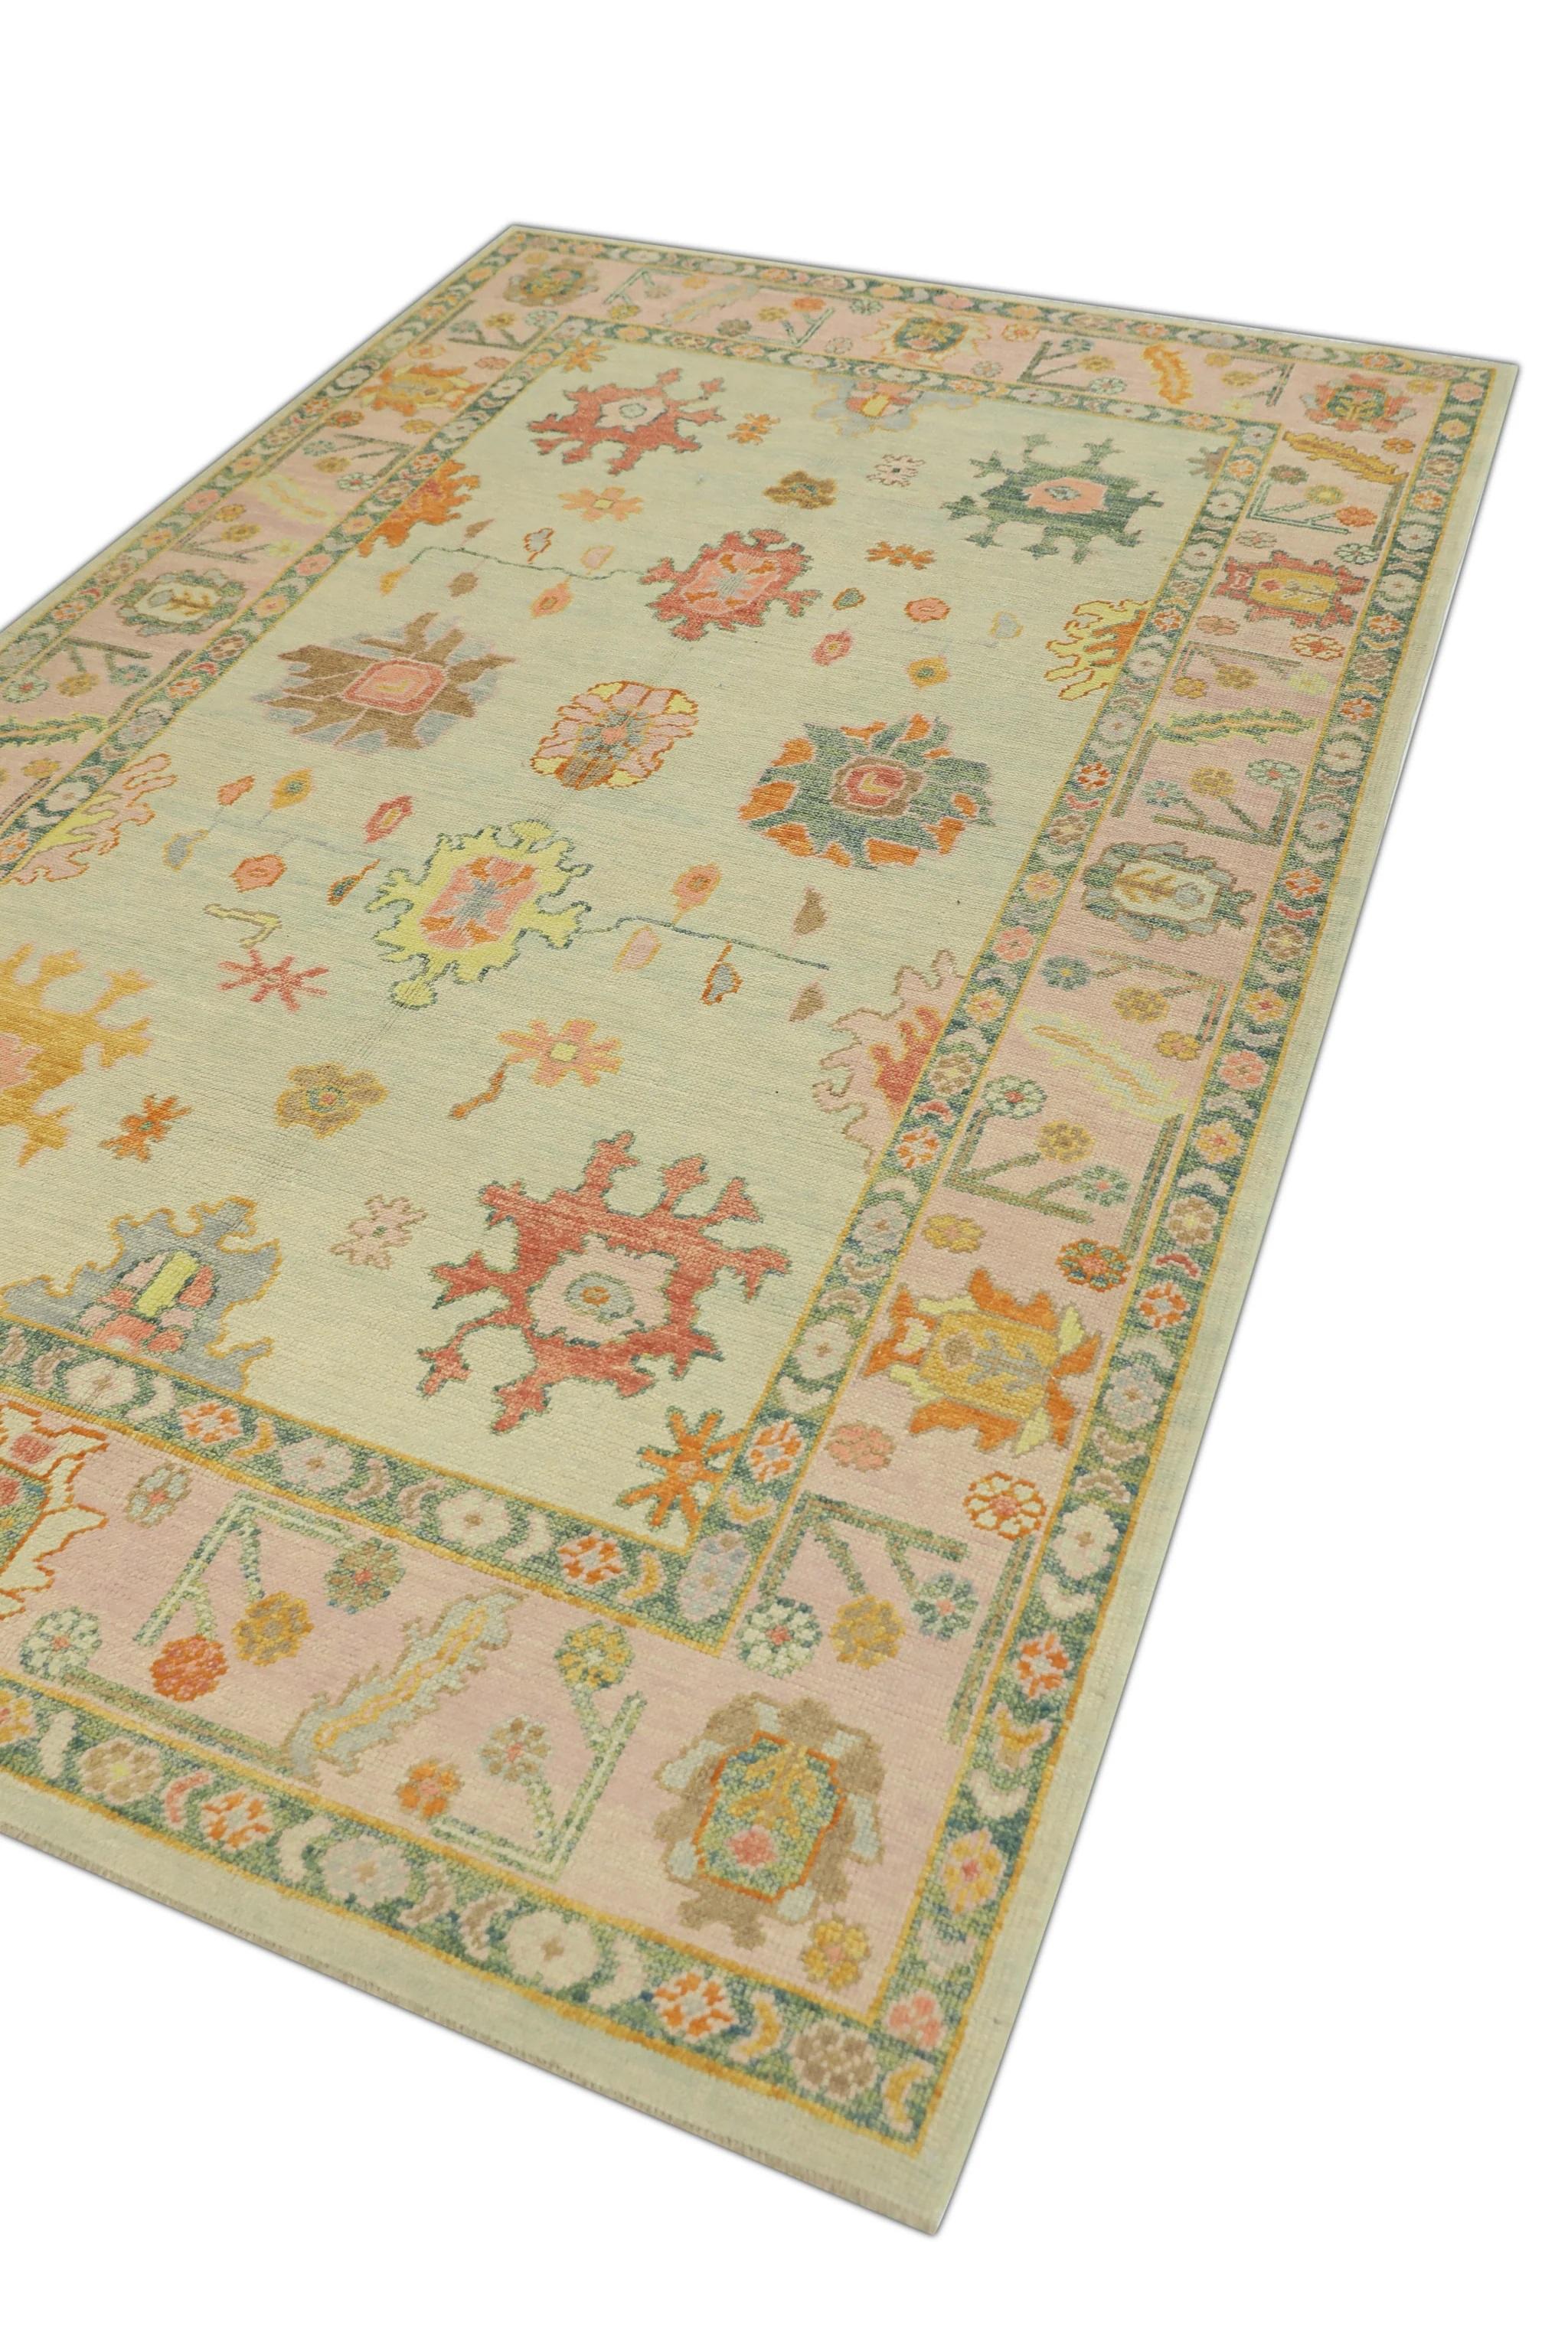 Vegetable Dyed Green and Pink Floral Design Handwoven Wool Turkish Oushak Rug 6' x 9'6